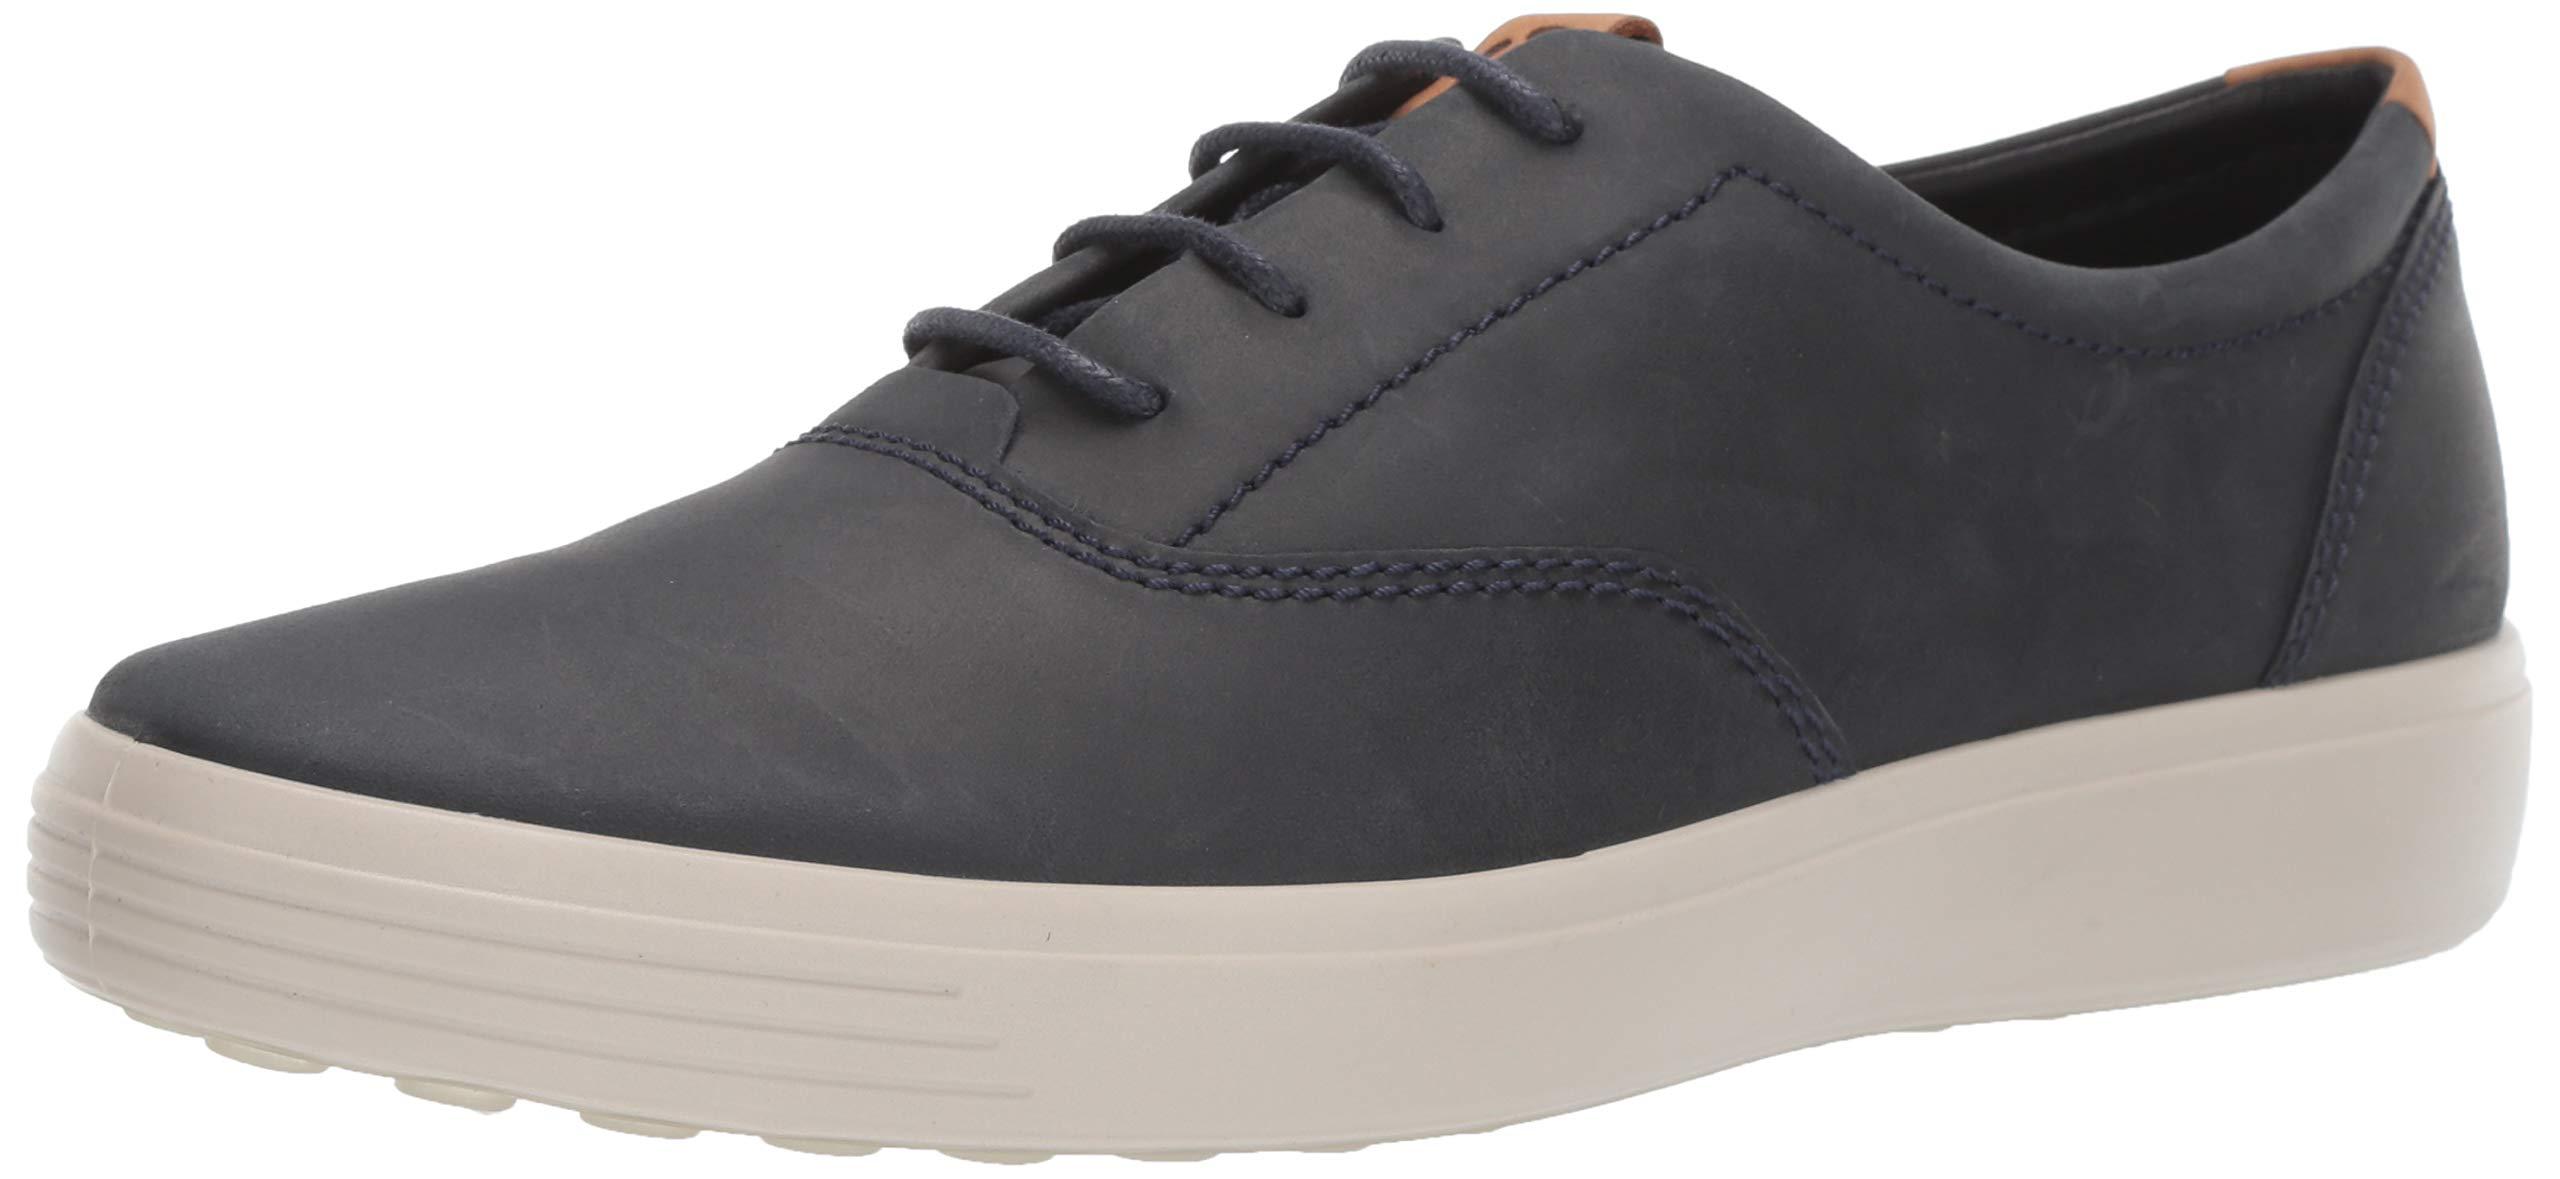 Ecco Soft 7 M Low-top Sneakers, Blue (marine 2038), 7 Uk for Men | Lyst